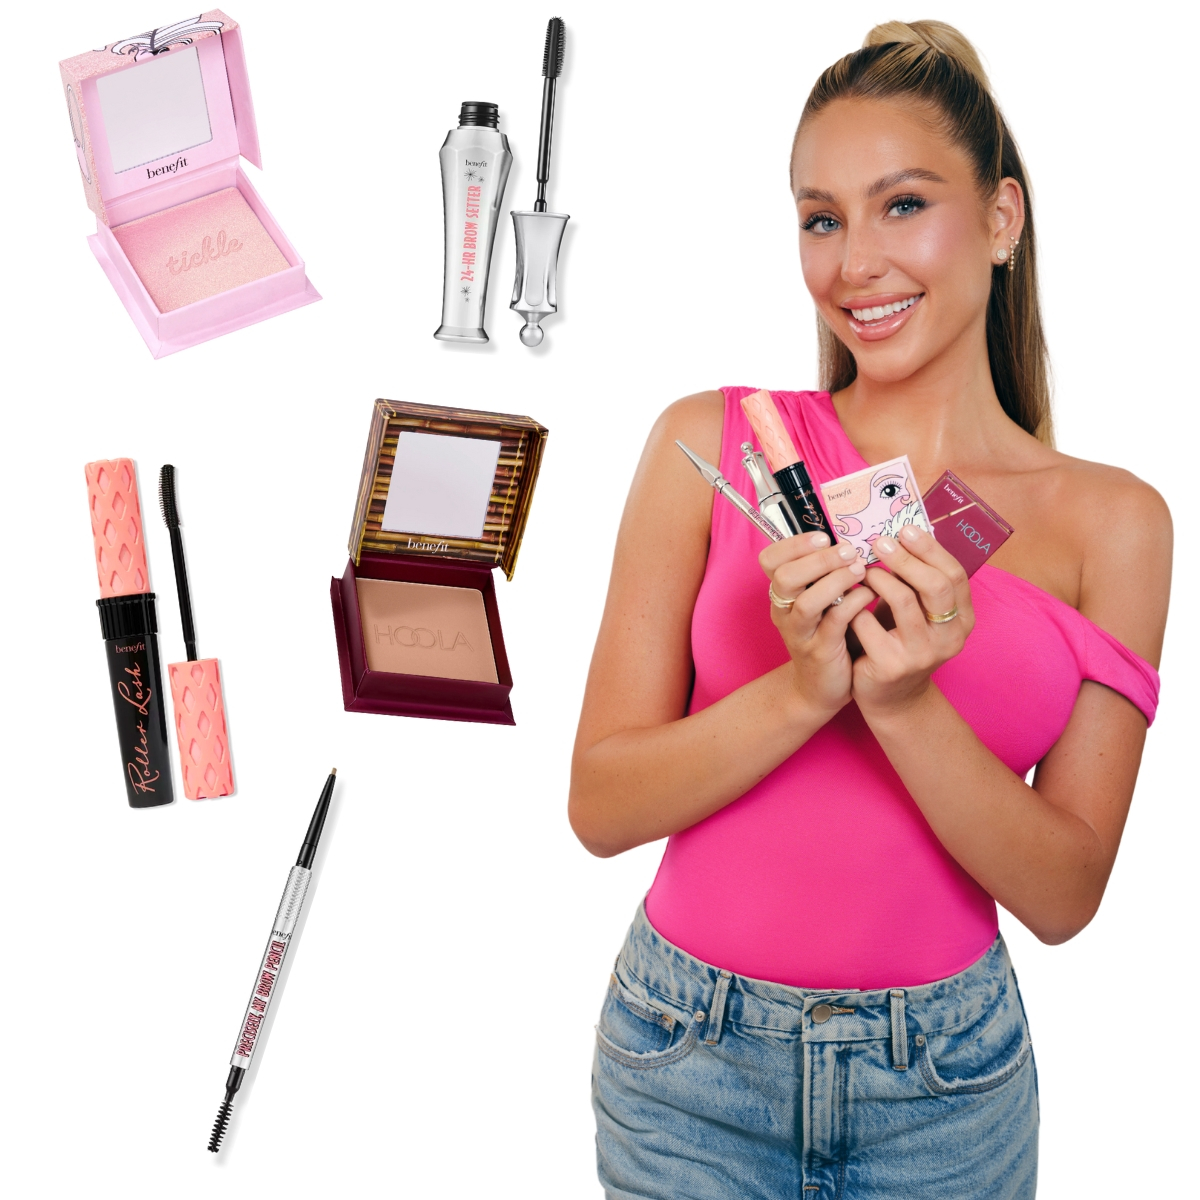 Ready Earle's Makeup Must-Haves - E!